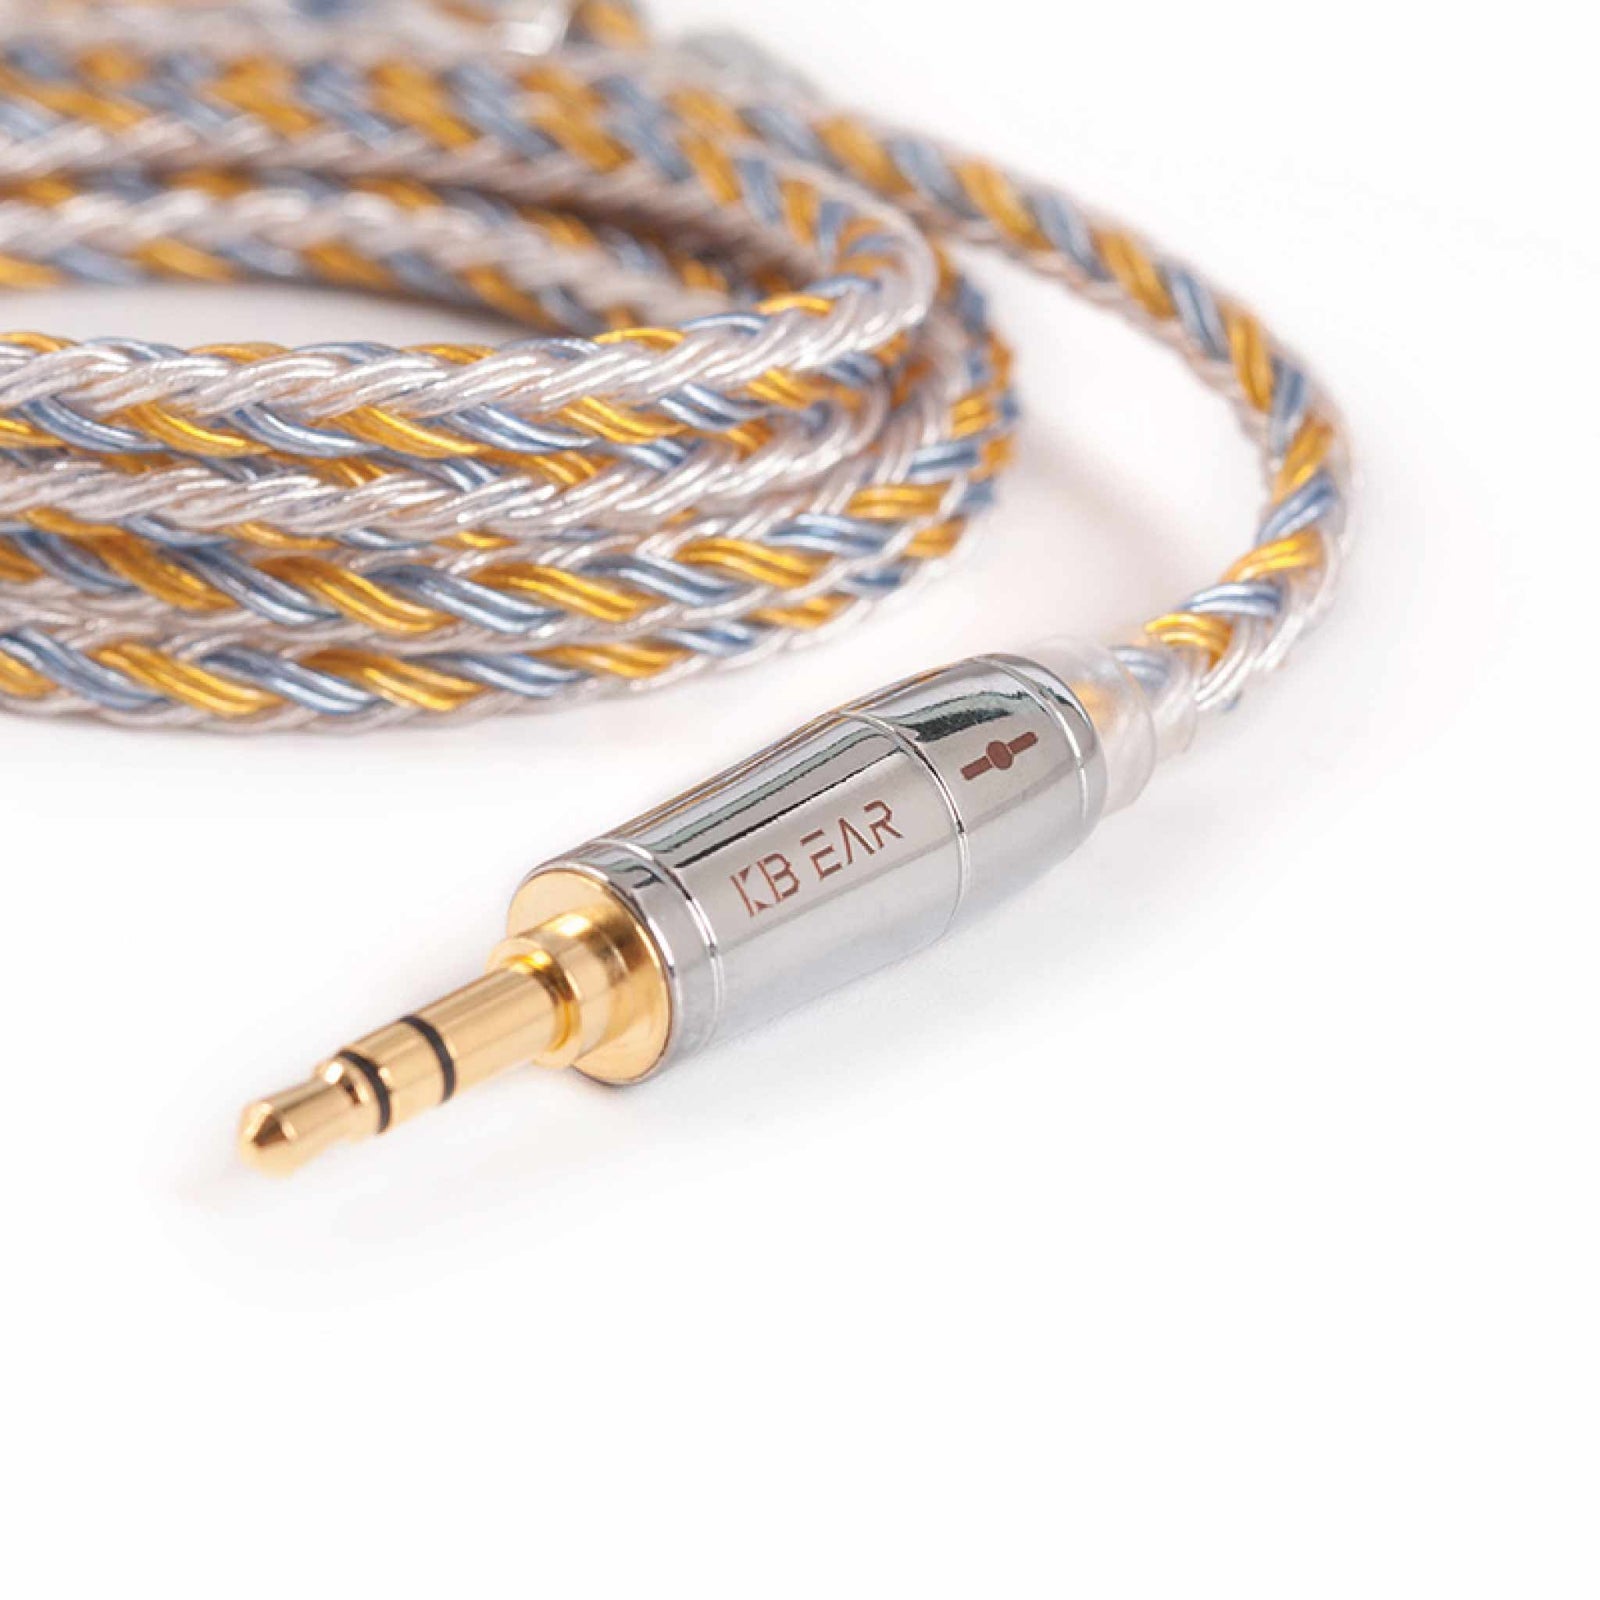 Dual 3.5mm 16 Cores Silver Plated HiFi Cable for Hifiman Arya